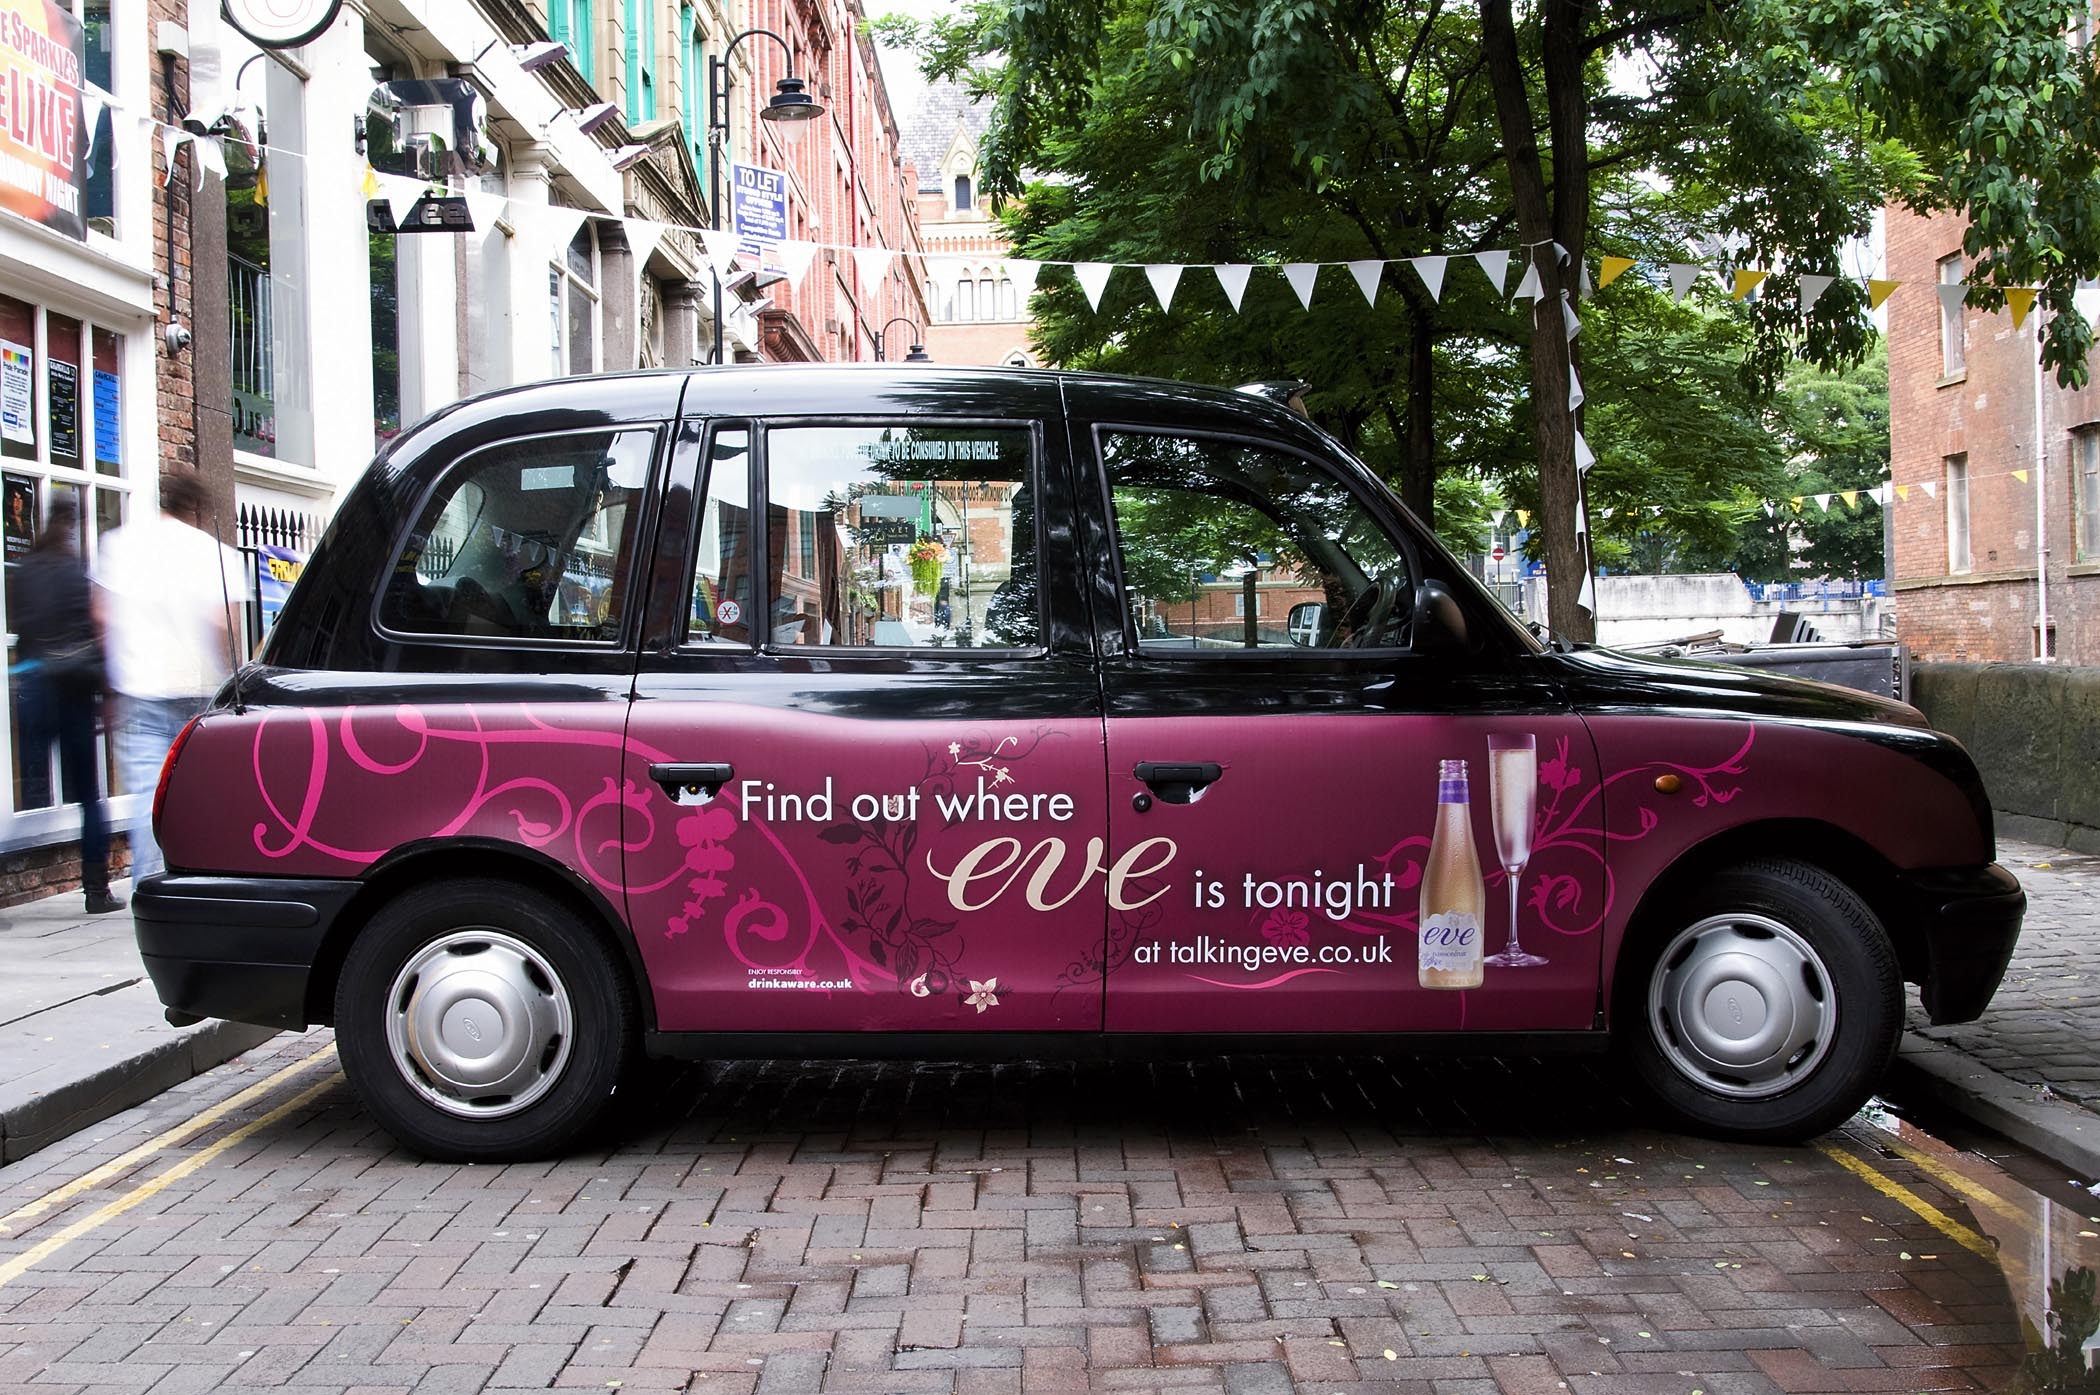 2009 Ubiquitous taxi advertising campaign for Carlsberg - Find out where Eve is tonight